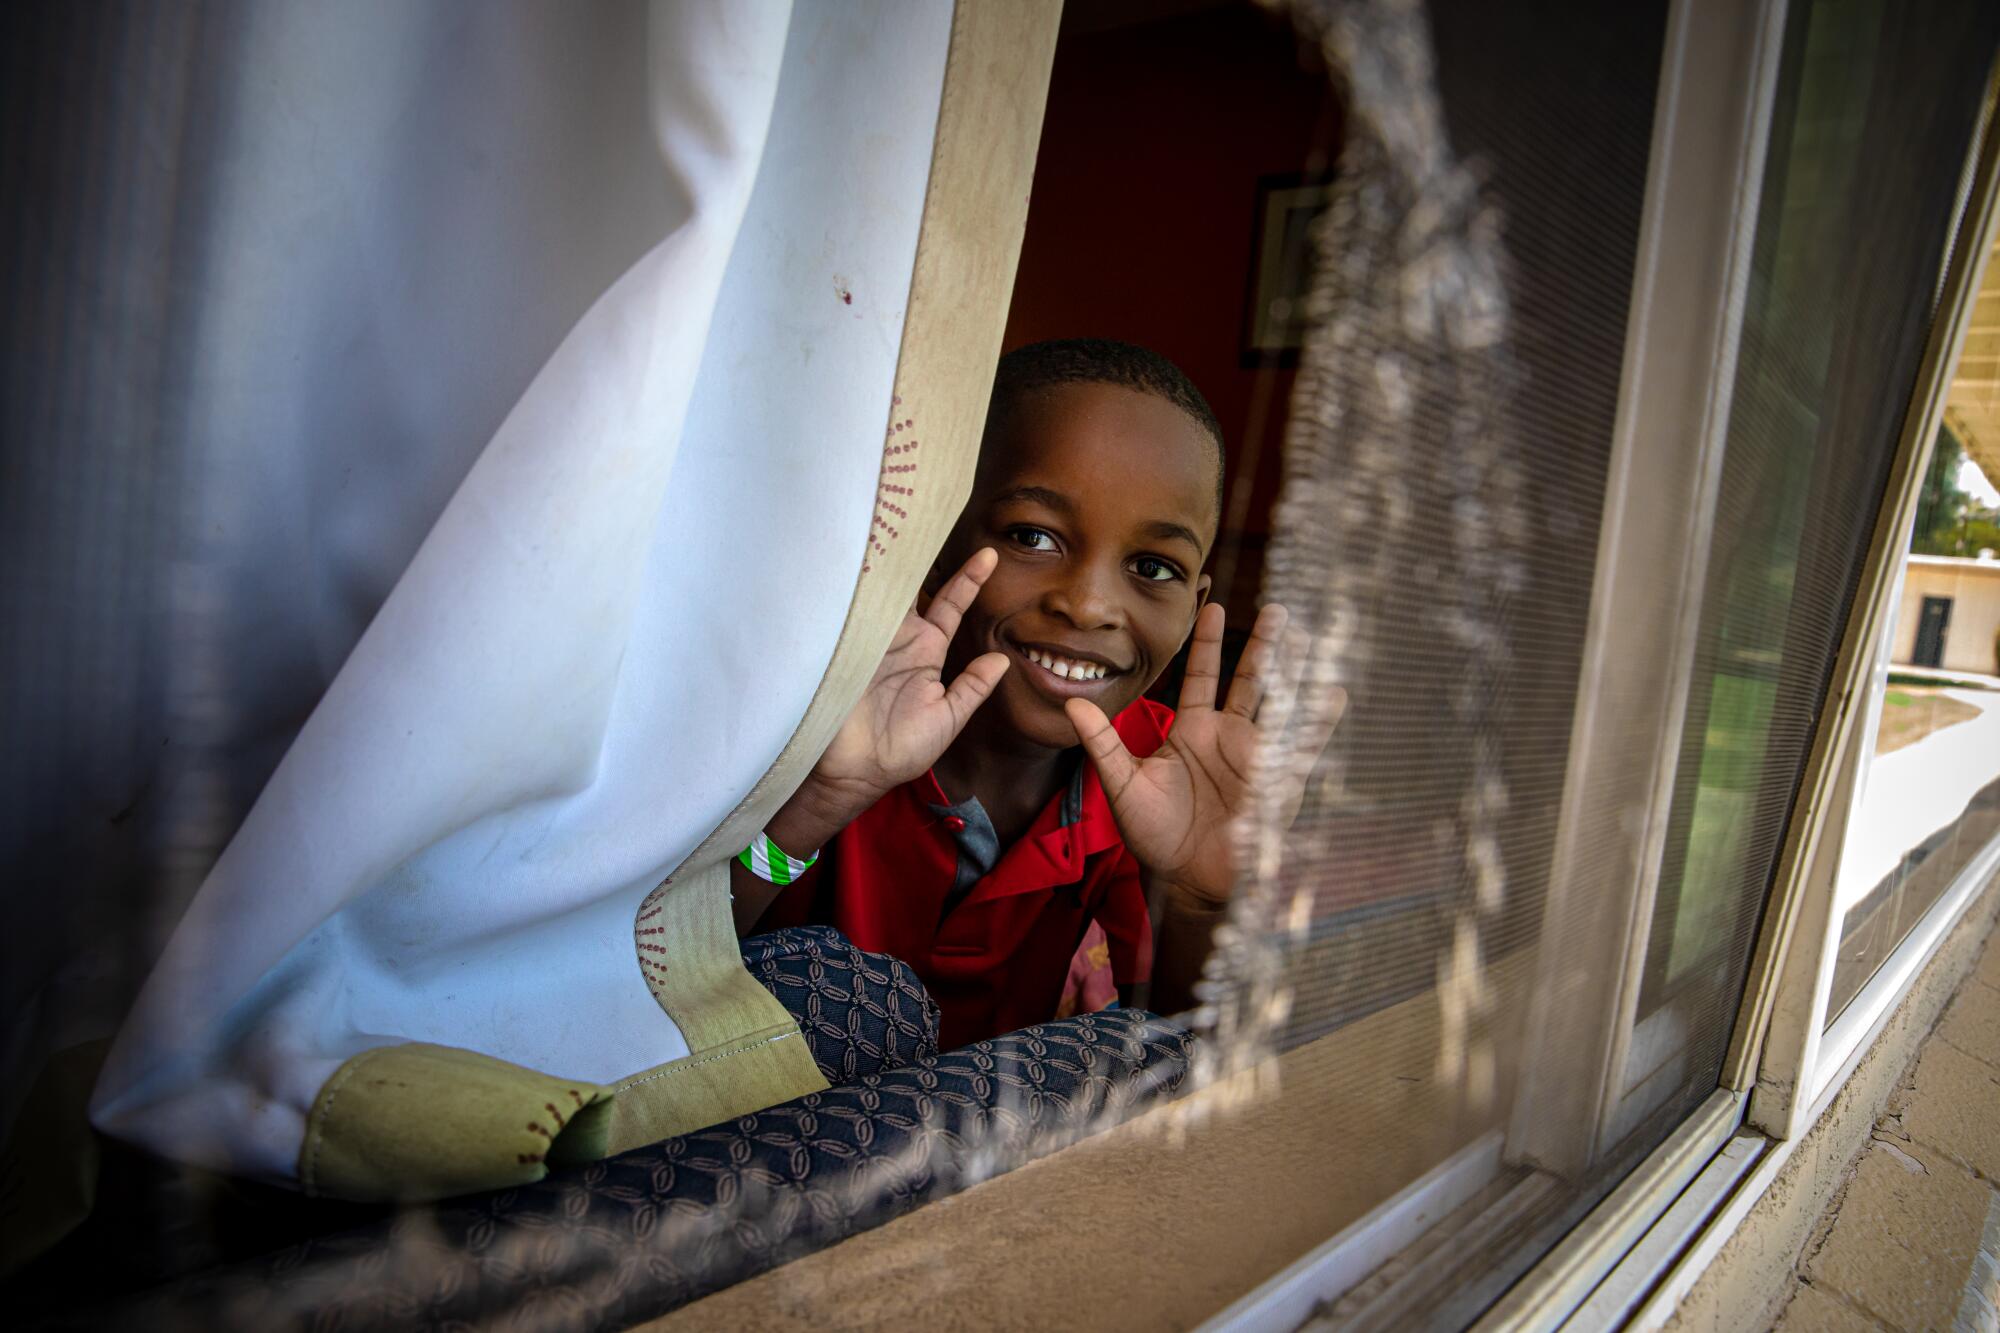 Rood Morancy Siverne, son of Haitian asylum seekers, peeks through a window at the shelter for newly arrived immigrants.